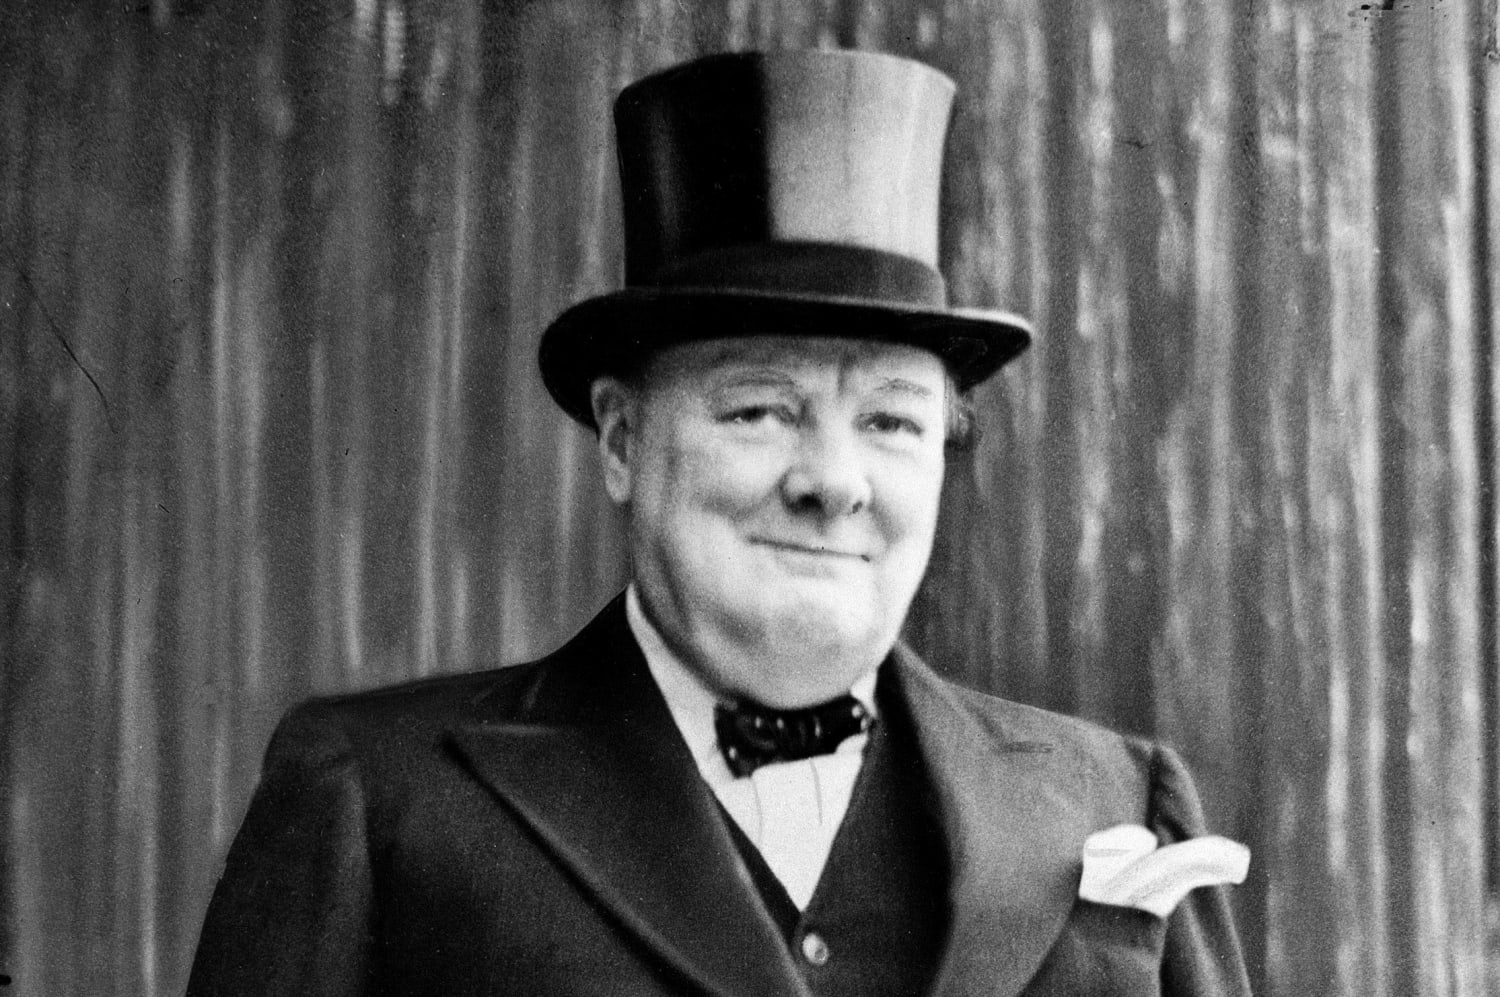 Churchill's Family Begged Him Not to Convert to Islam, Letter Shows ...